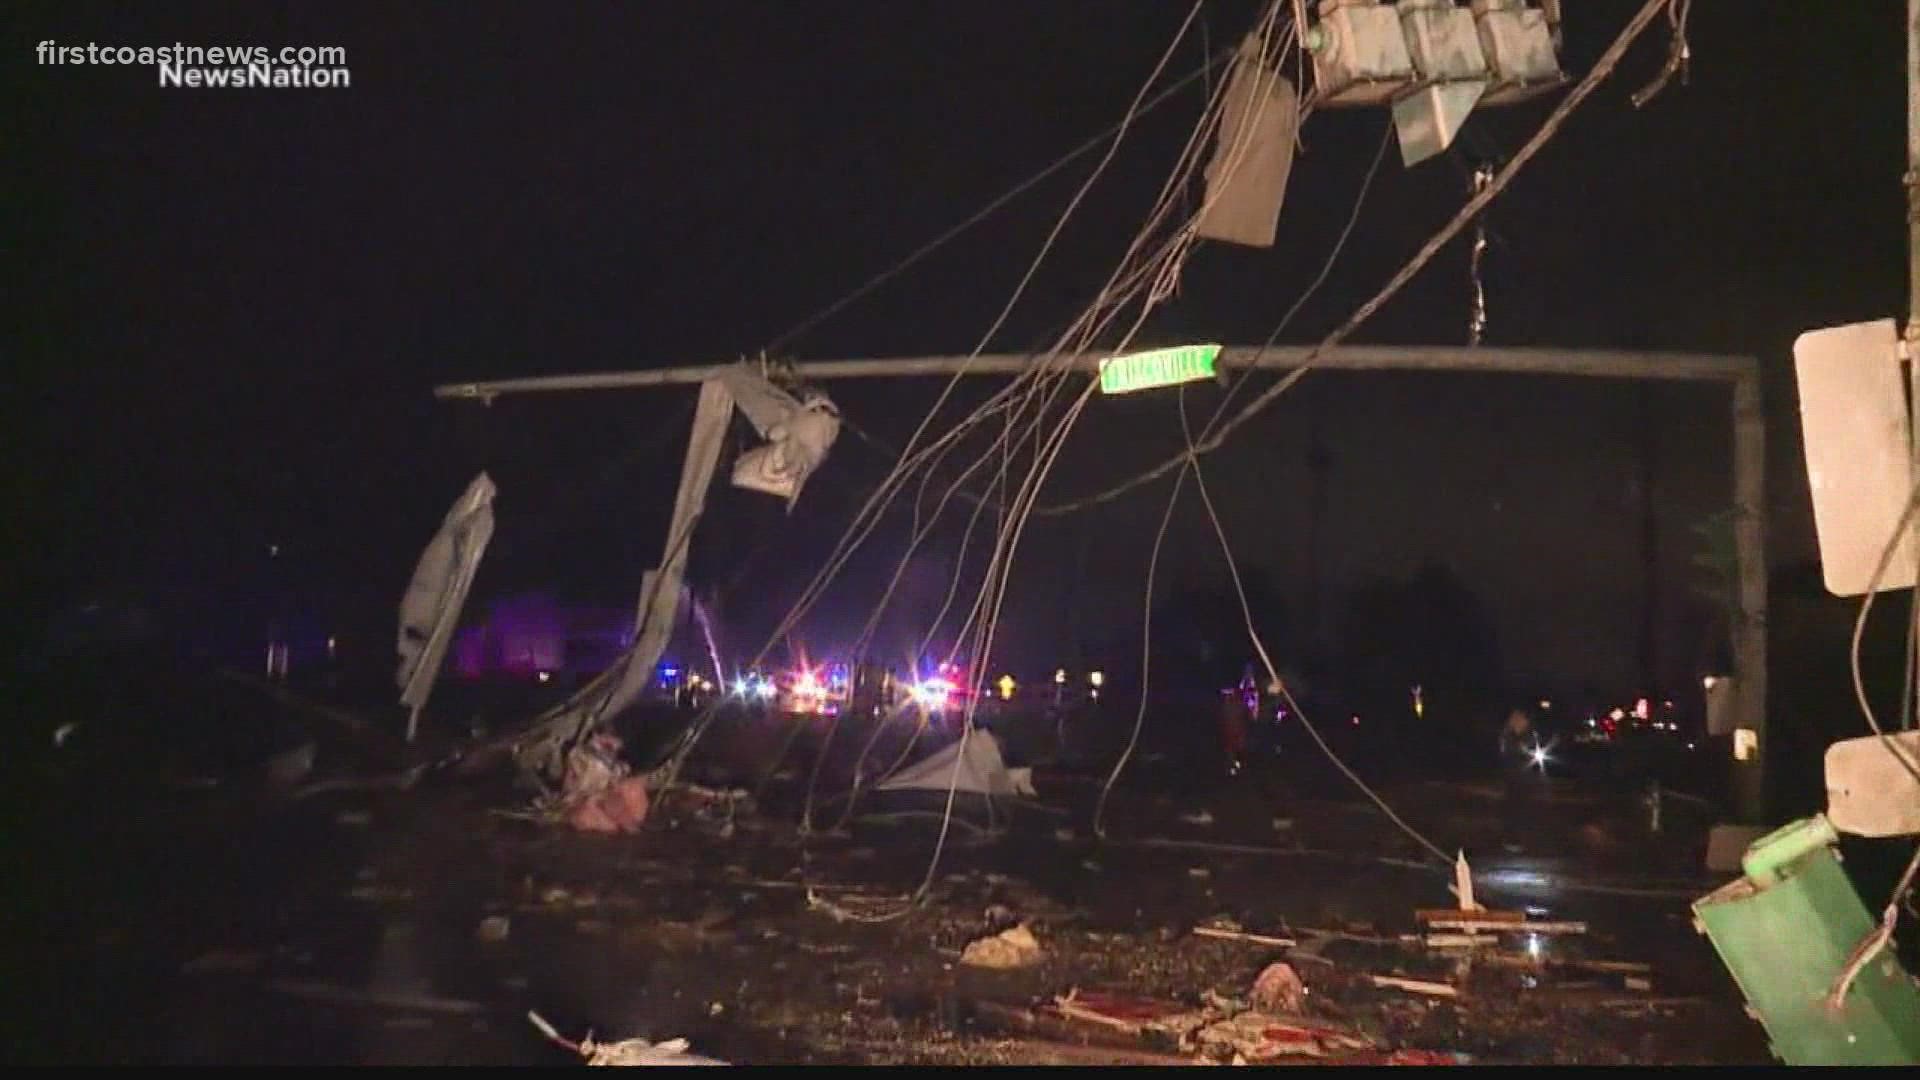 Widespread damage was reported to homes and businesses in Southern Louisiana.